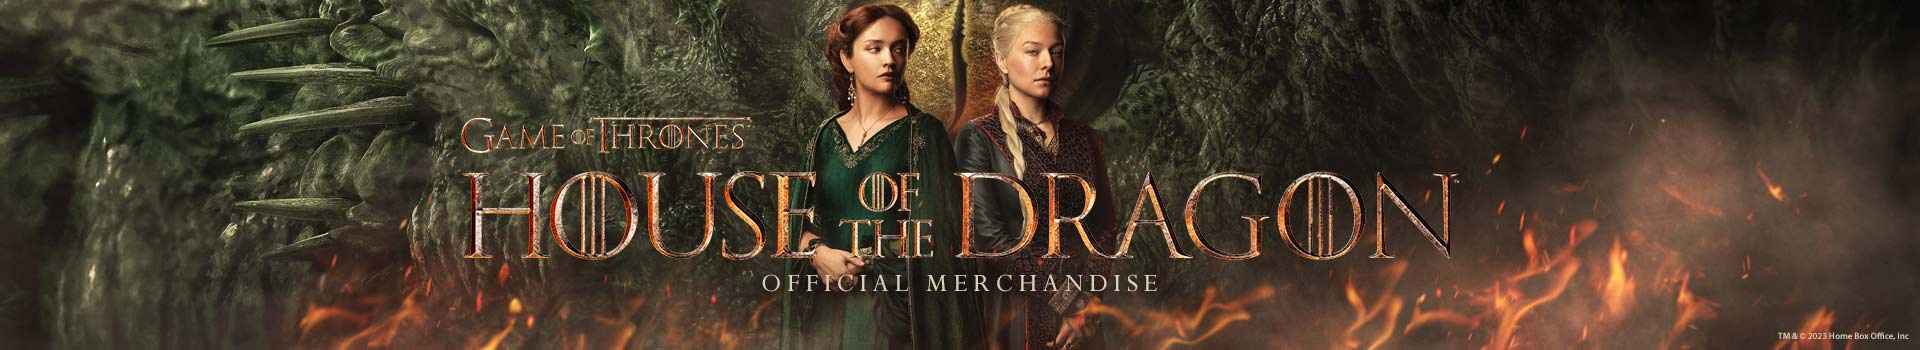 House Of The Dragon Official Merchandise